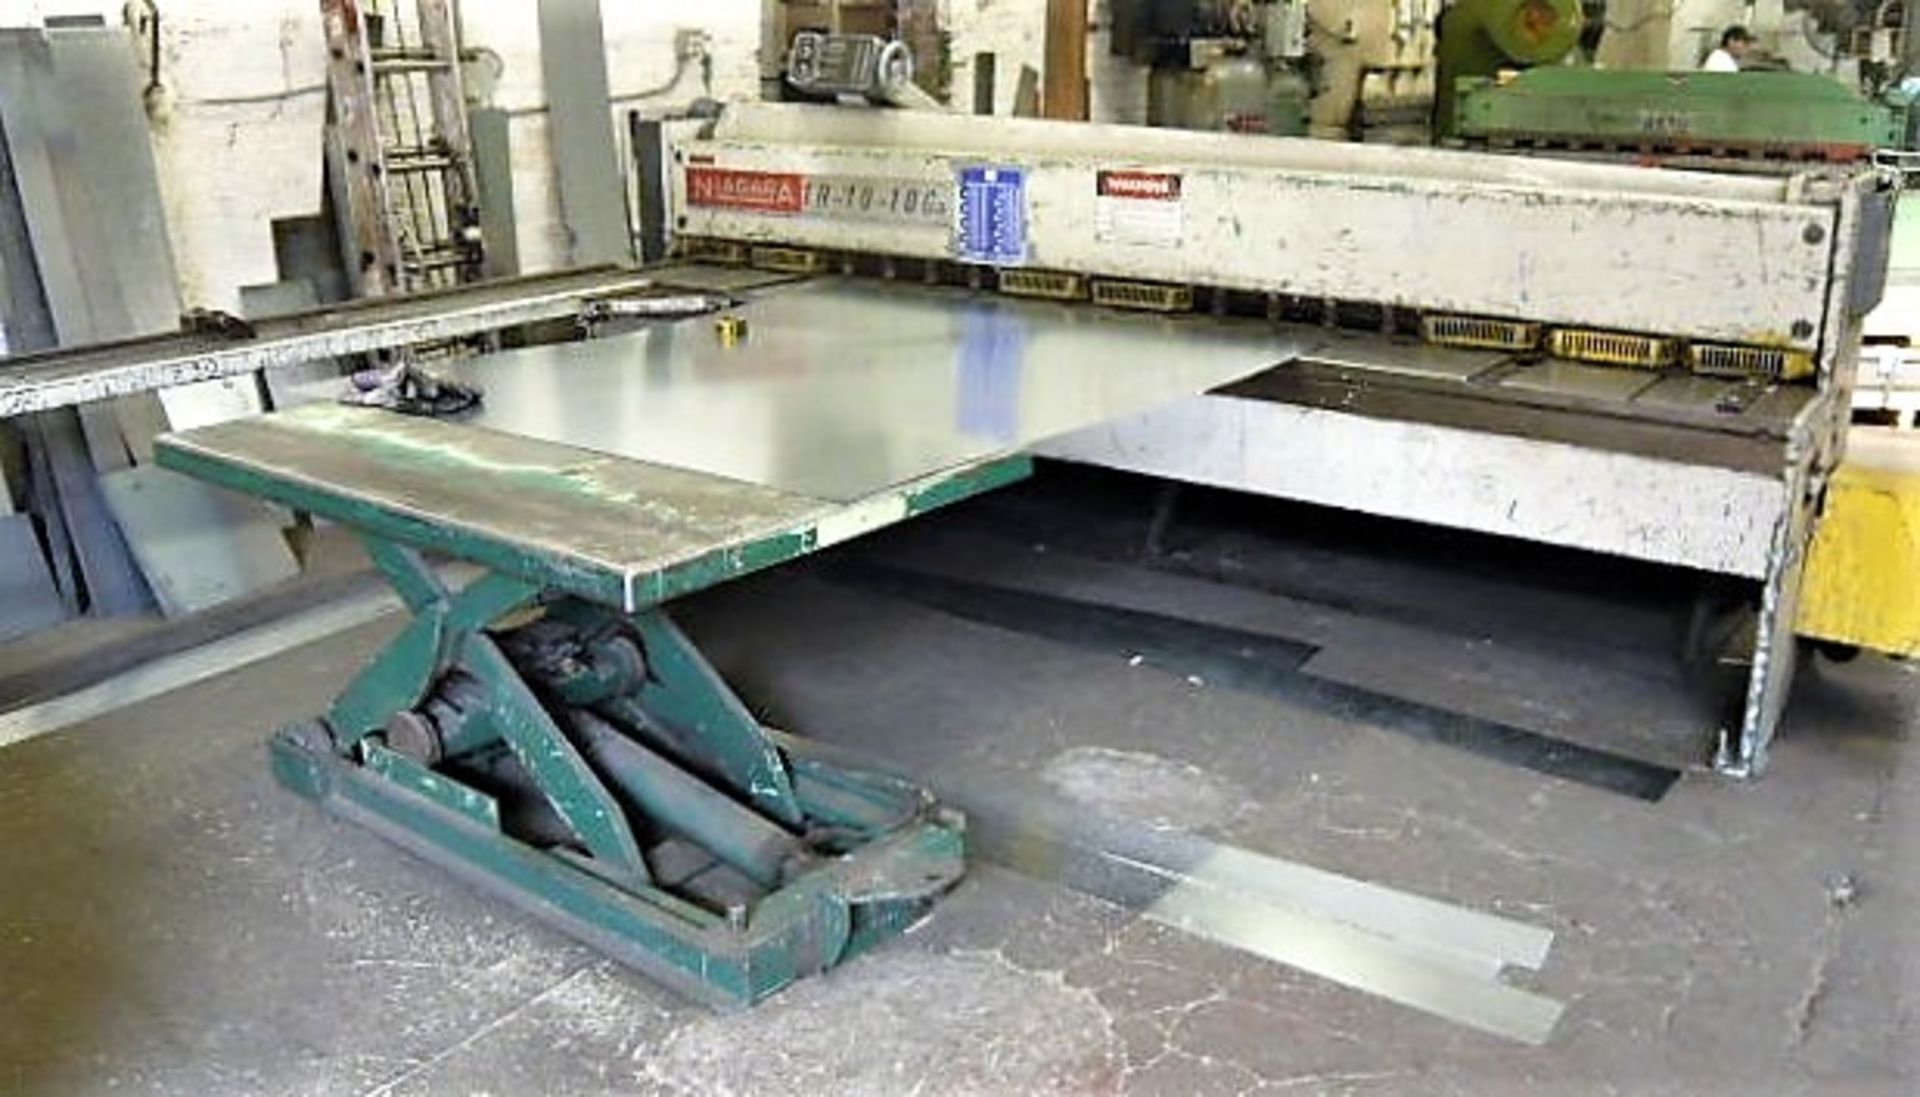 10ga X 10' NIAGARA MDL. 1R-10-10 MECHANICAL POWER SHEAR, WITH SQUARING ARM, FRONT OPERATED POWER